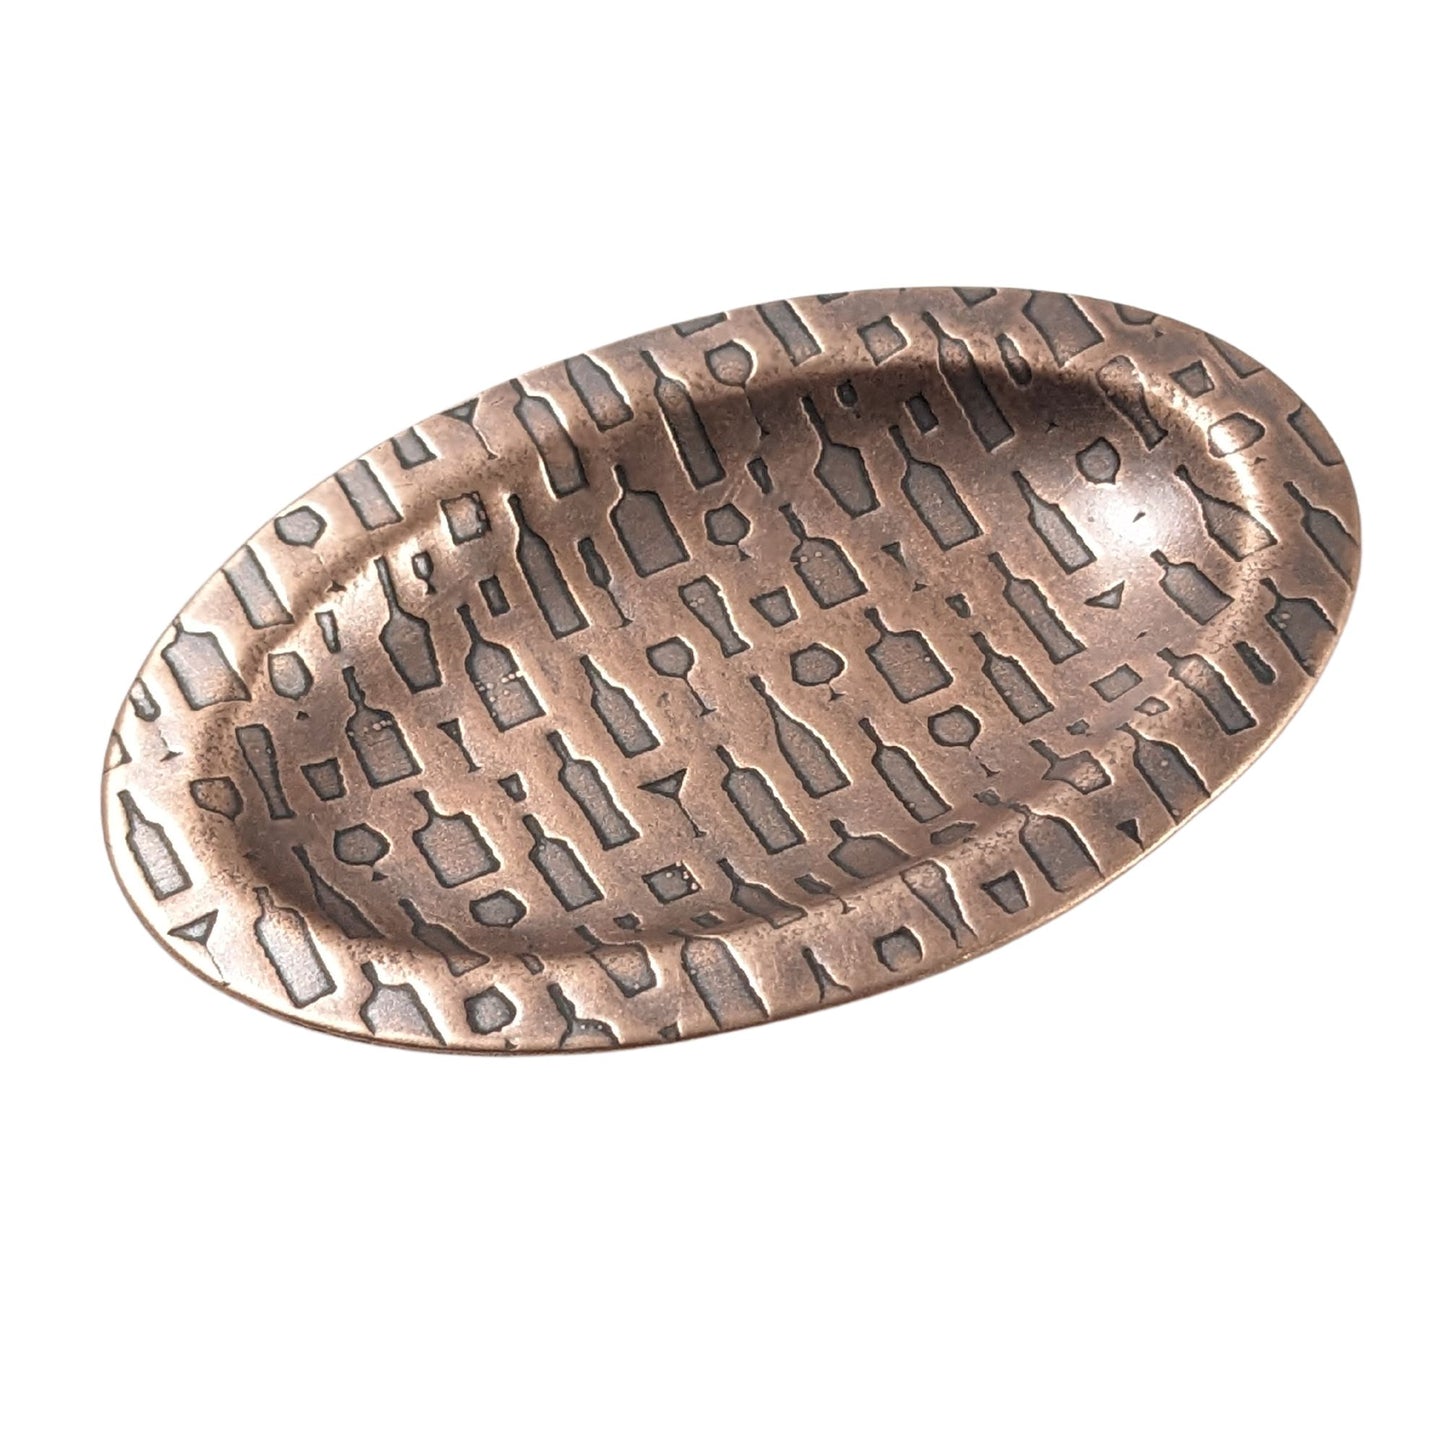 An oval copper ring dish with a raised edge. The dish has an impressed designs of wine and cocktail glasses plus wine and liquor bottles.